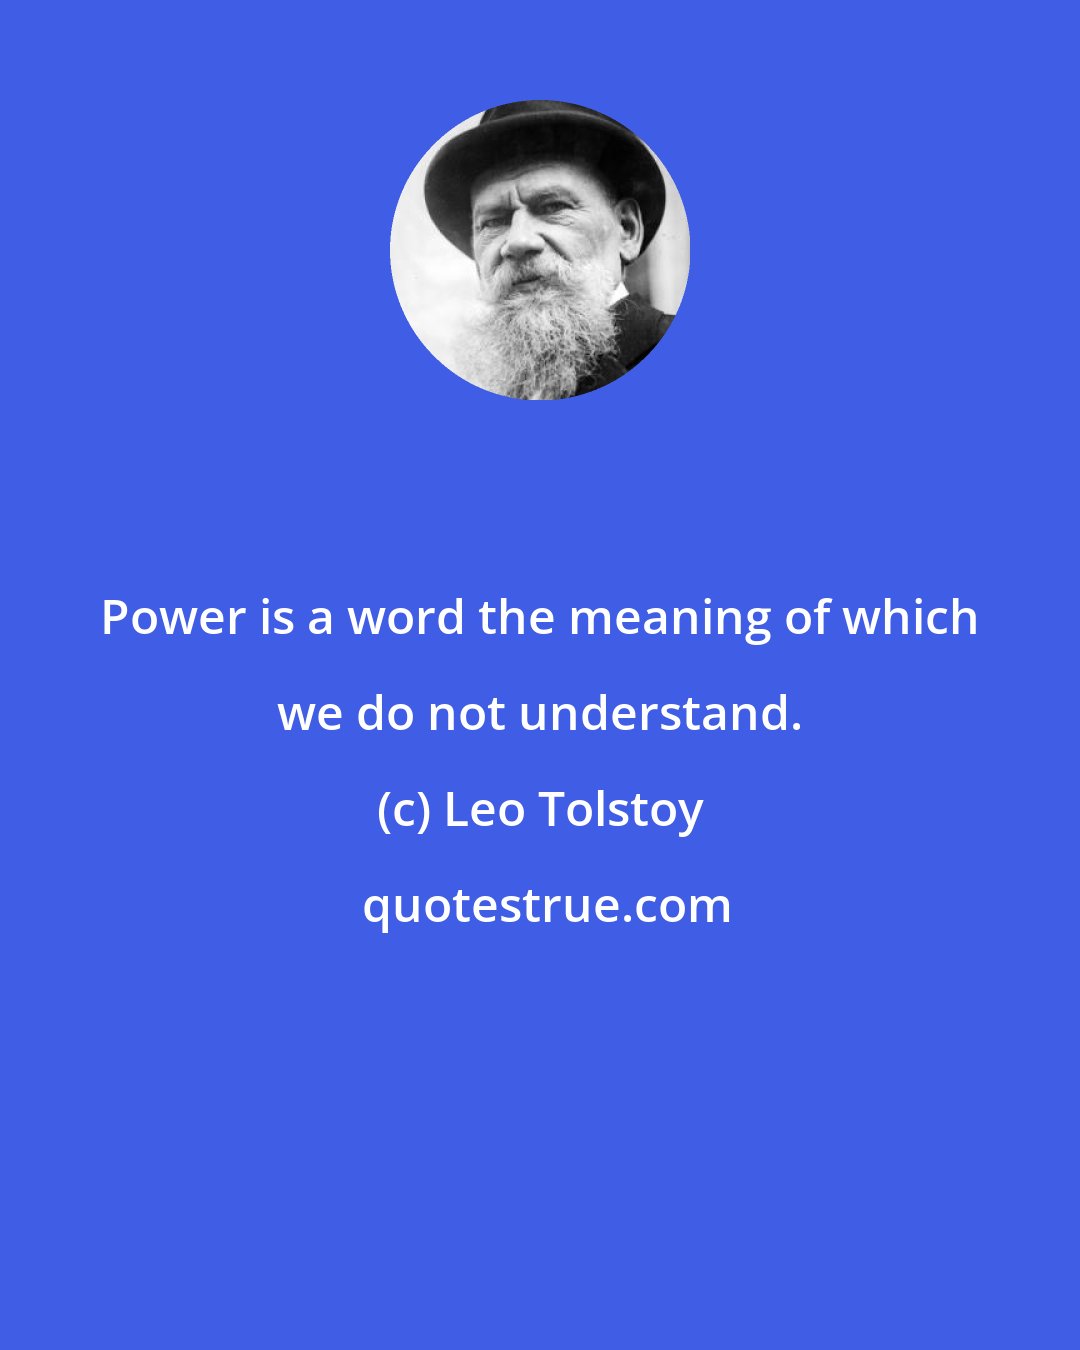 Leo Tolstoy: Power is a word the meaning of which we do not understand.